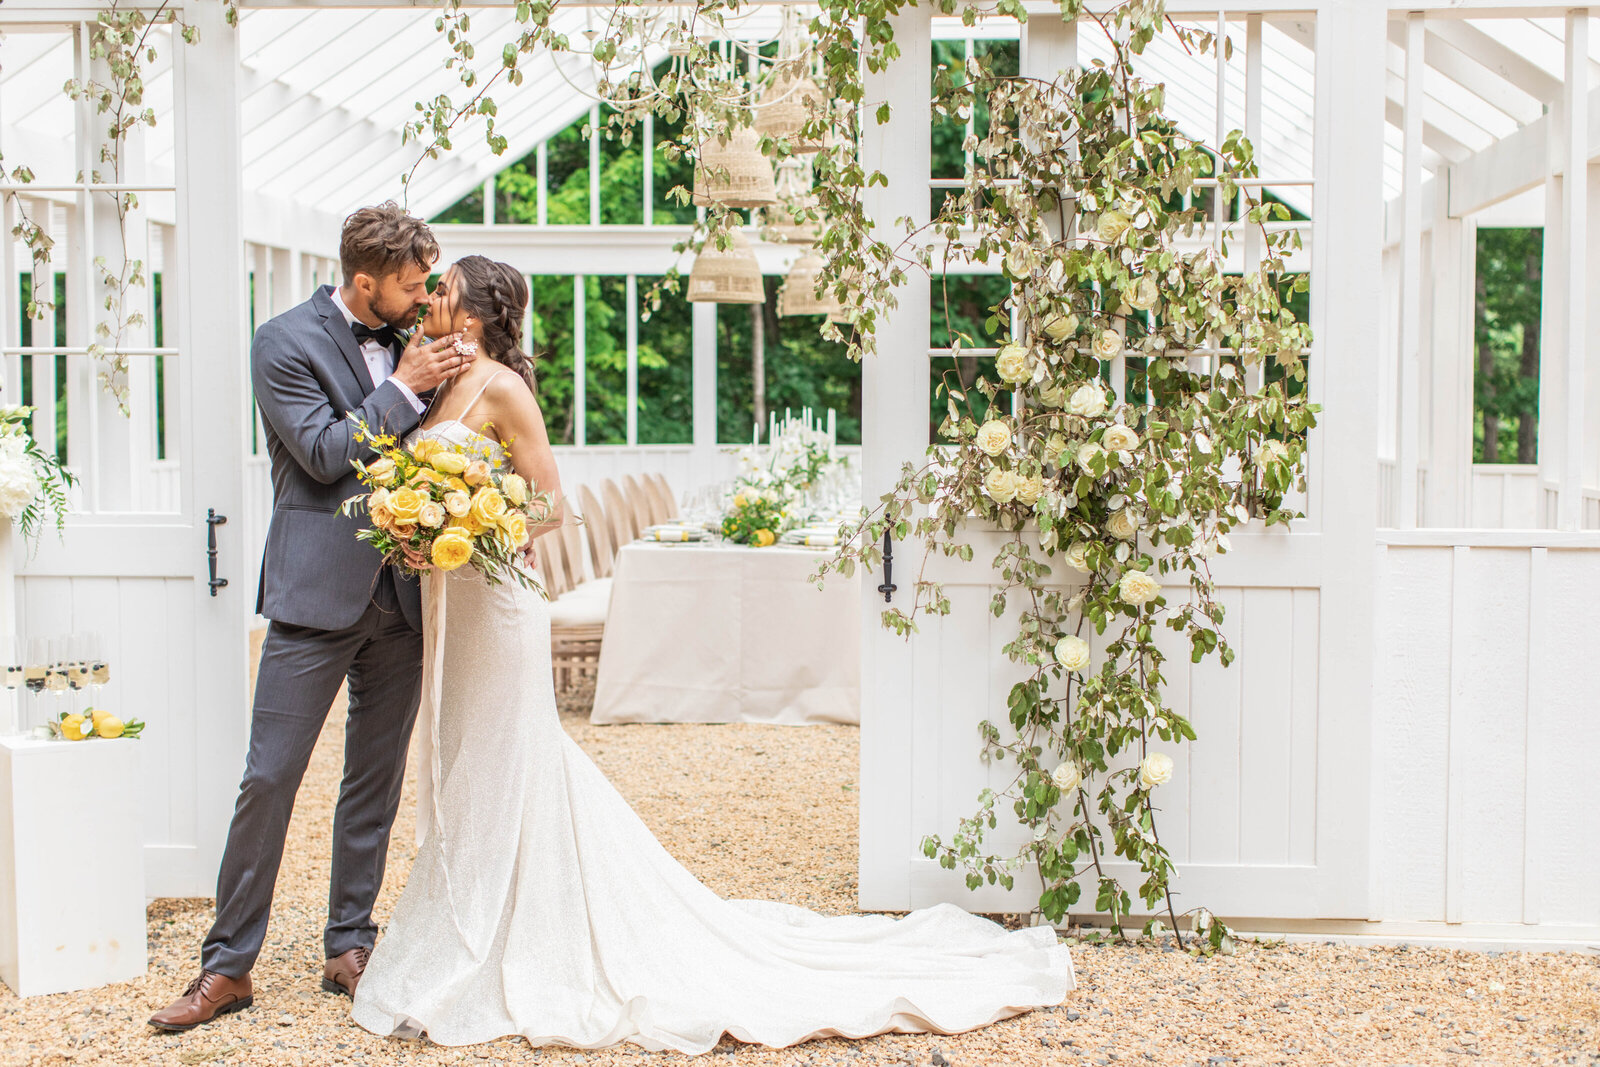 Classy couple kiss on their wedding day surrounded by greenery and holding a big yellow  flower bouquet